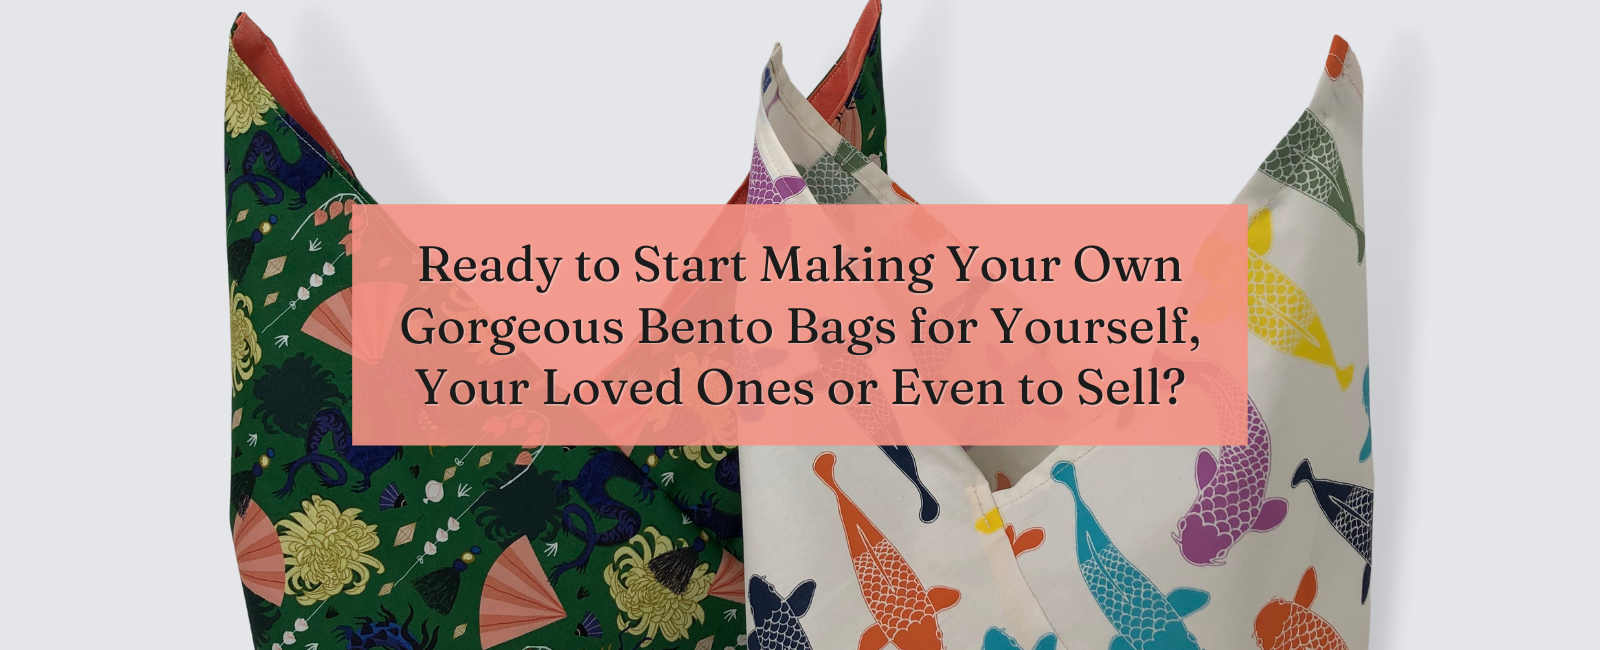 Bento bags image with text &quot;Ready to Start Making Your Own Gorgeous Bento Bags for Yourself, Your Loved Ones or Even to Sell?&quot;